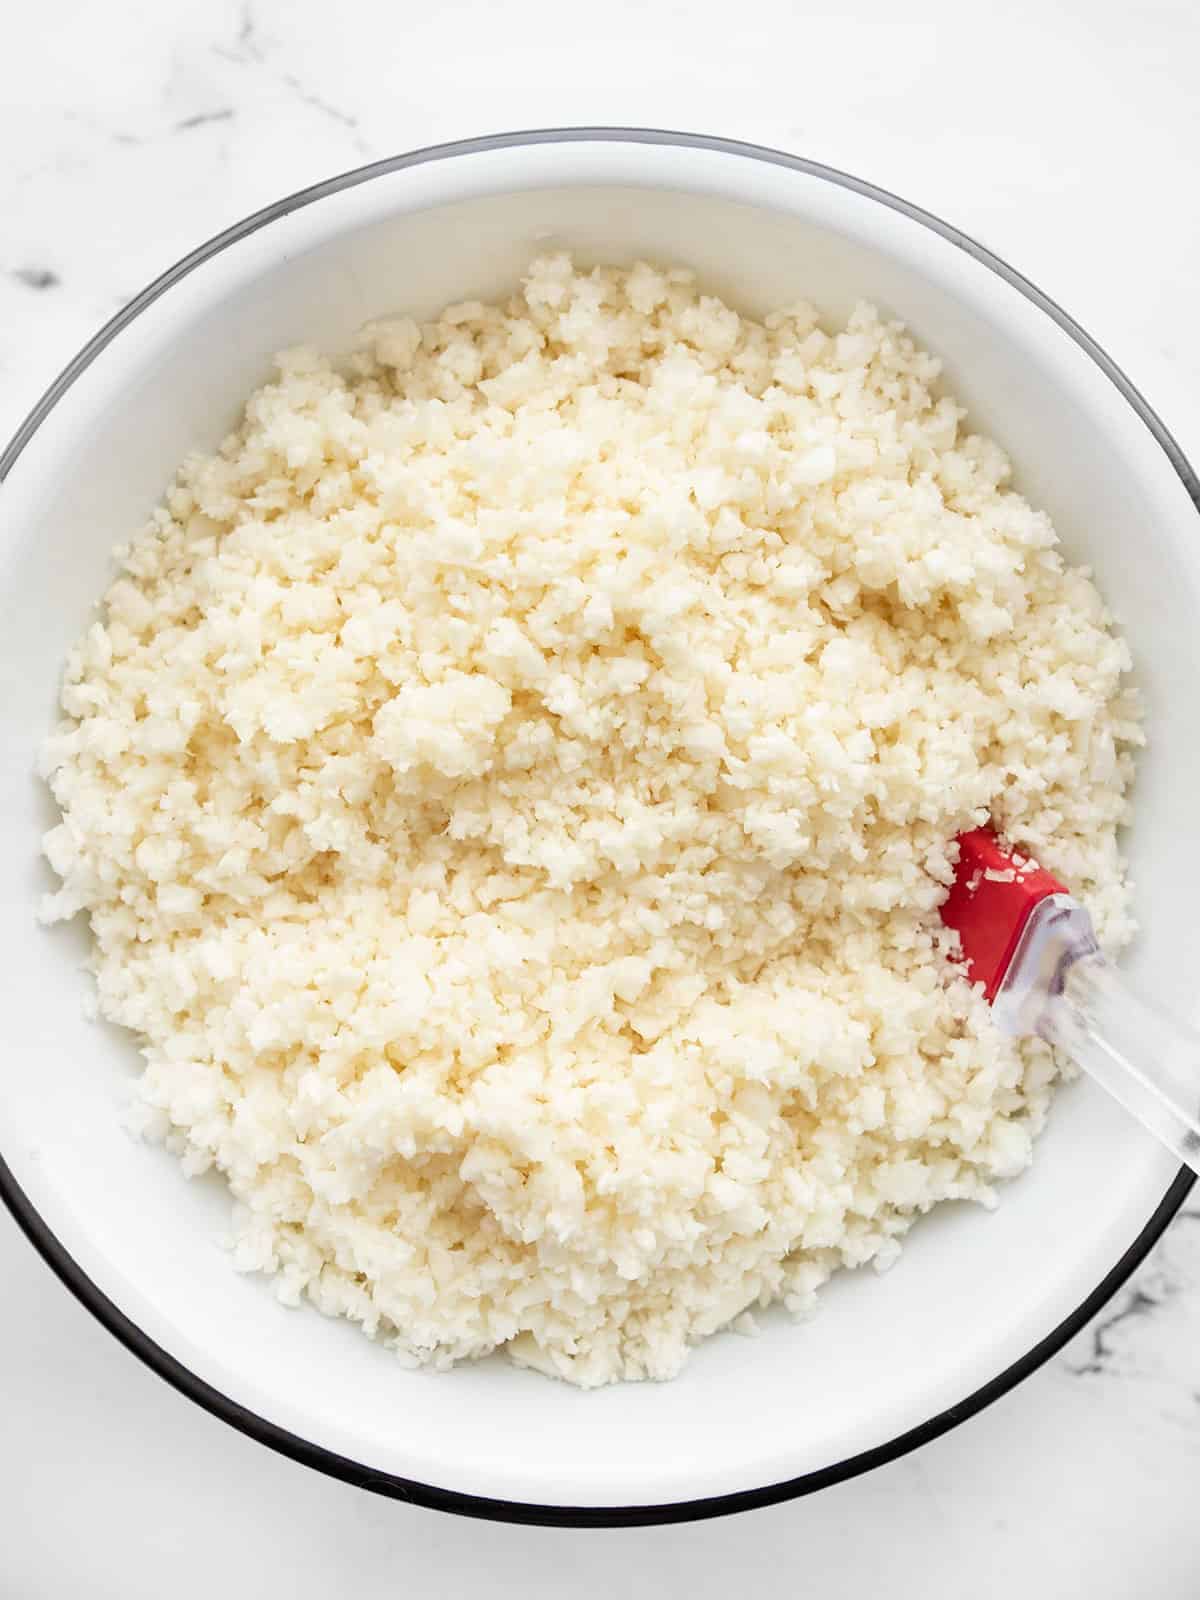 Overhead view of a bowl of riced cauliflower with a red spatula in the side